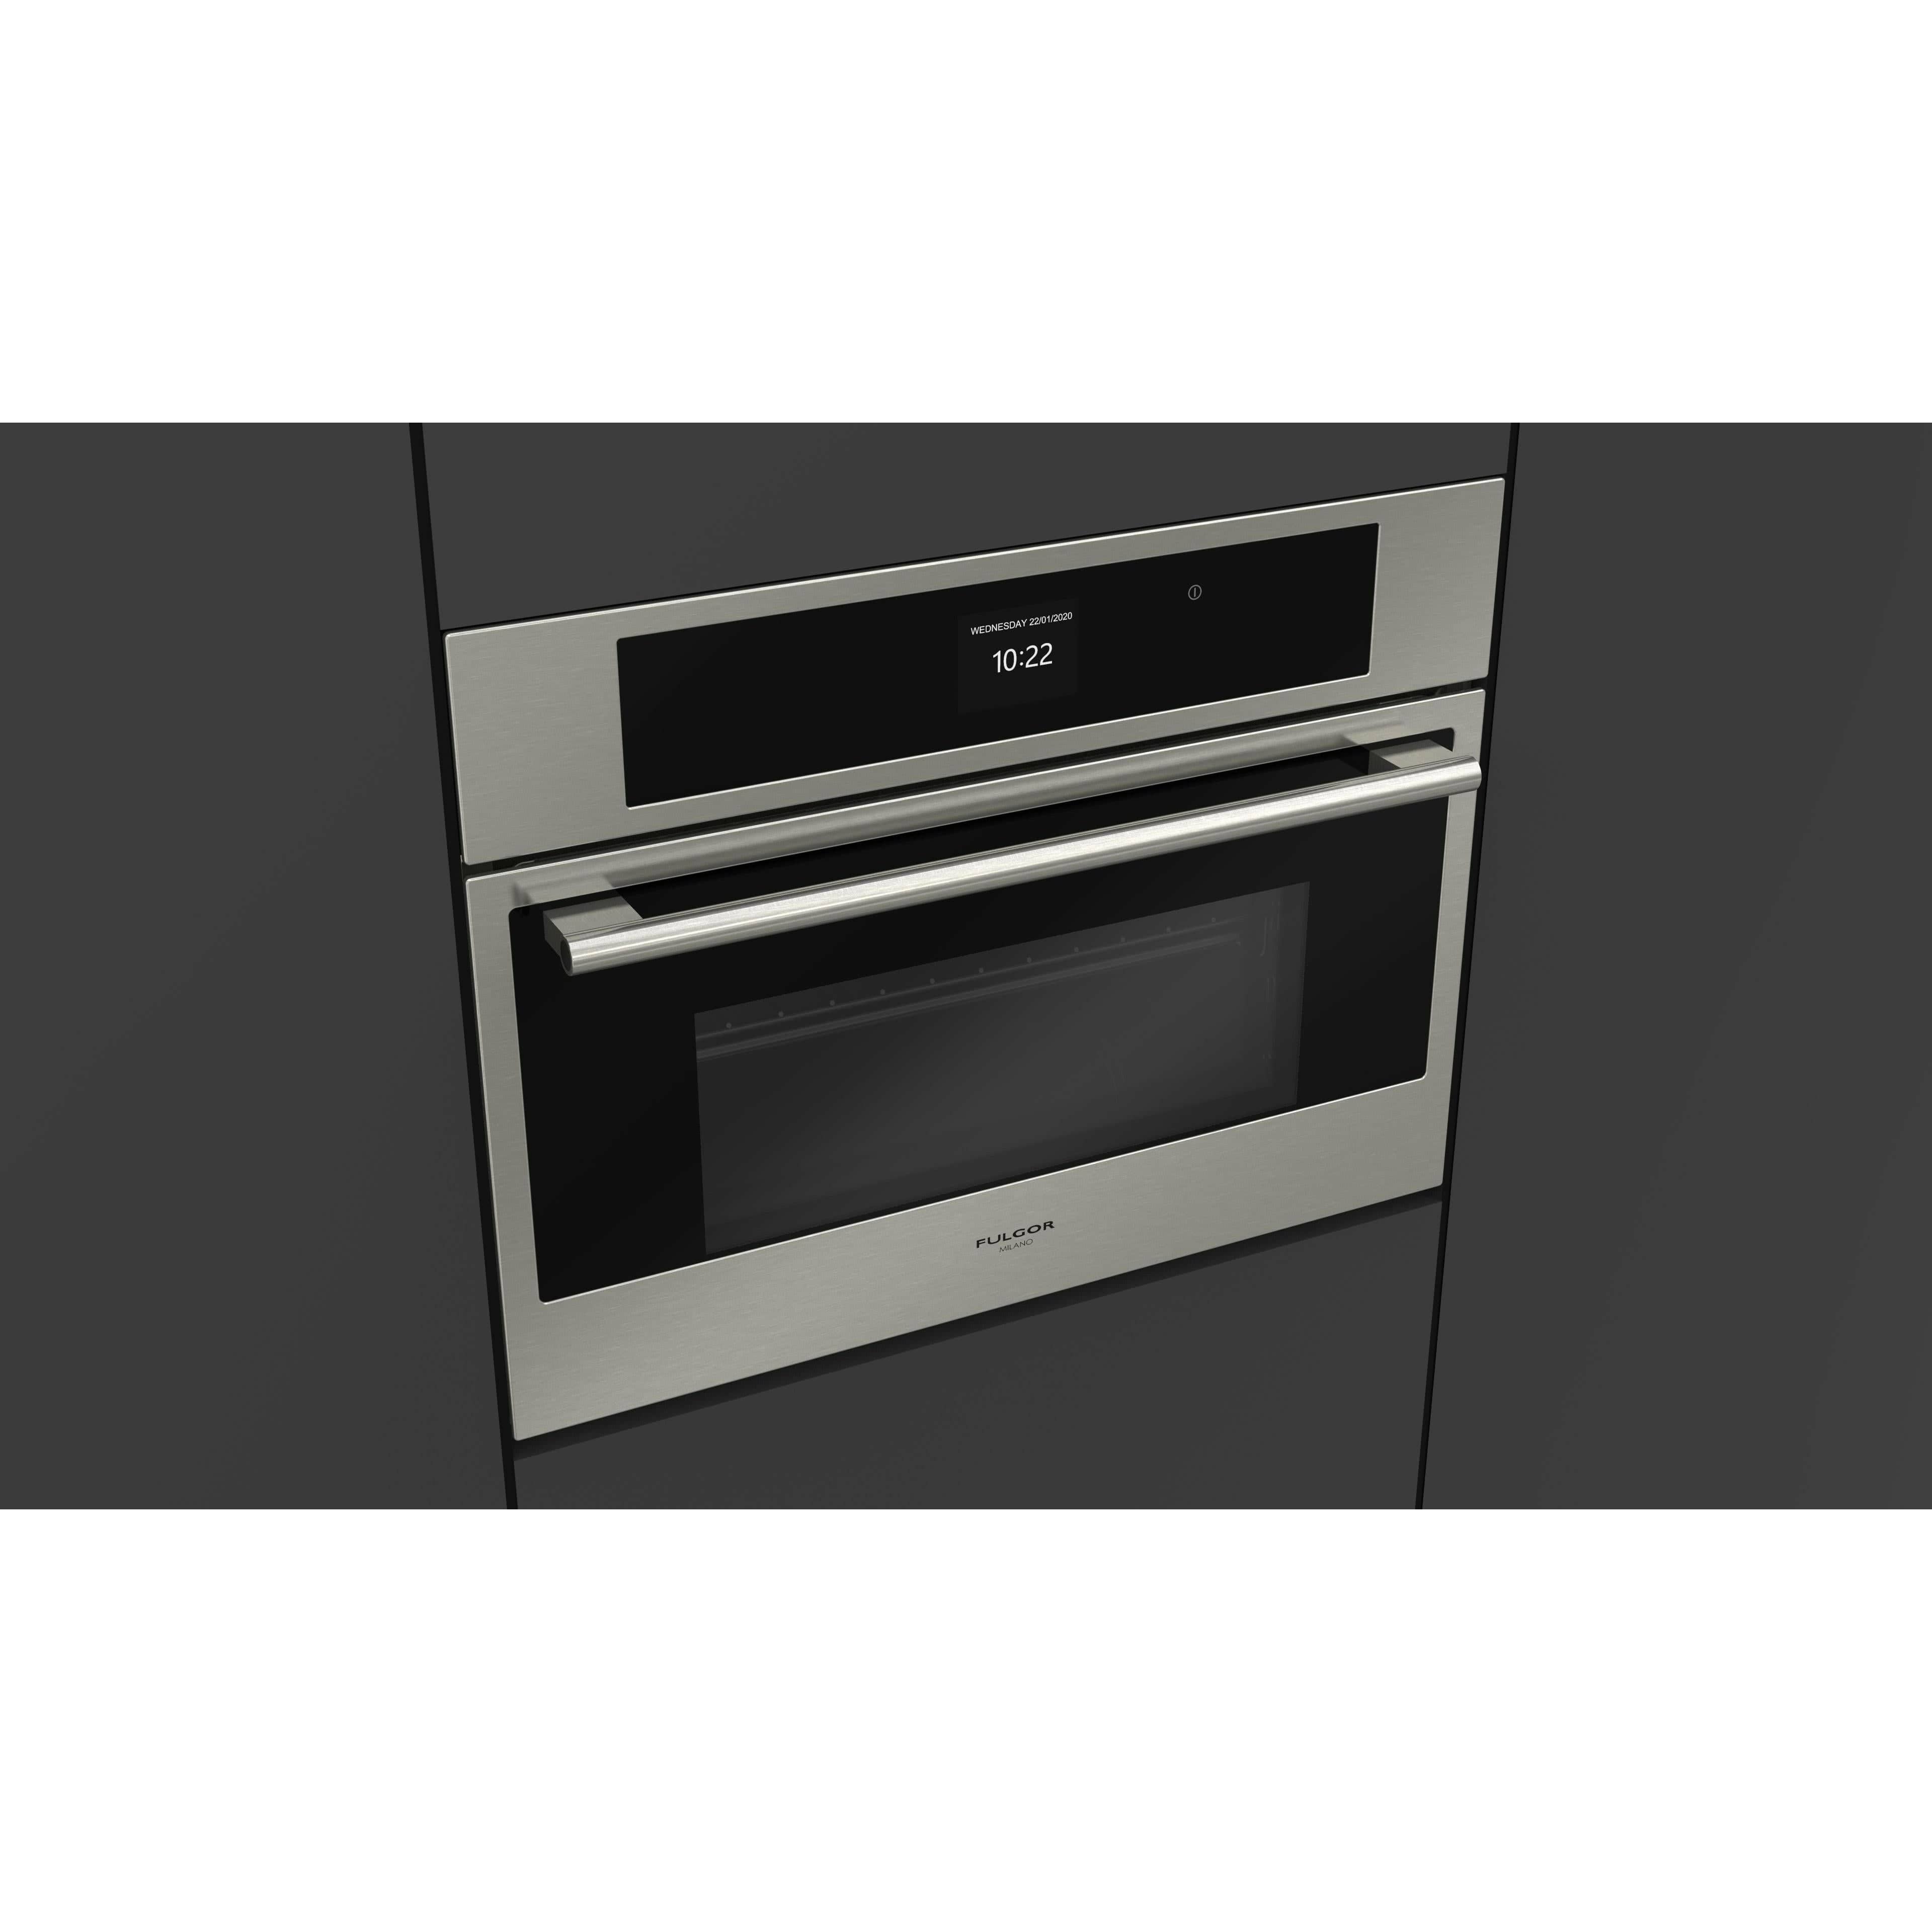 Fulgor Milano 24" Built-In Single Steam Wall Oven with Creactive Cooking System - F7SCO24S1 Wall Oven F7SCO24S1 Luxury Appliances Direct